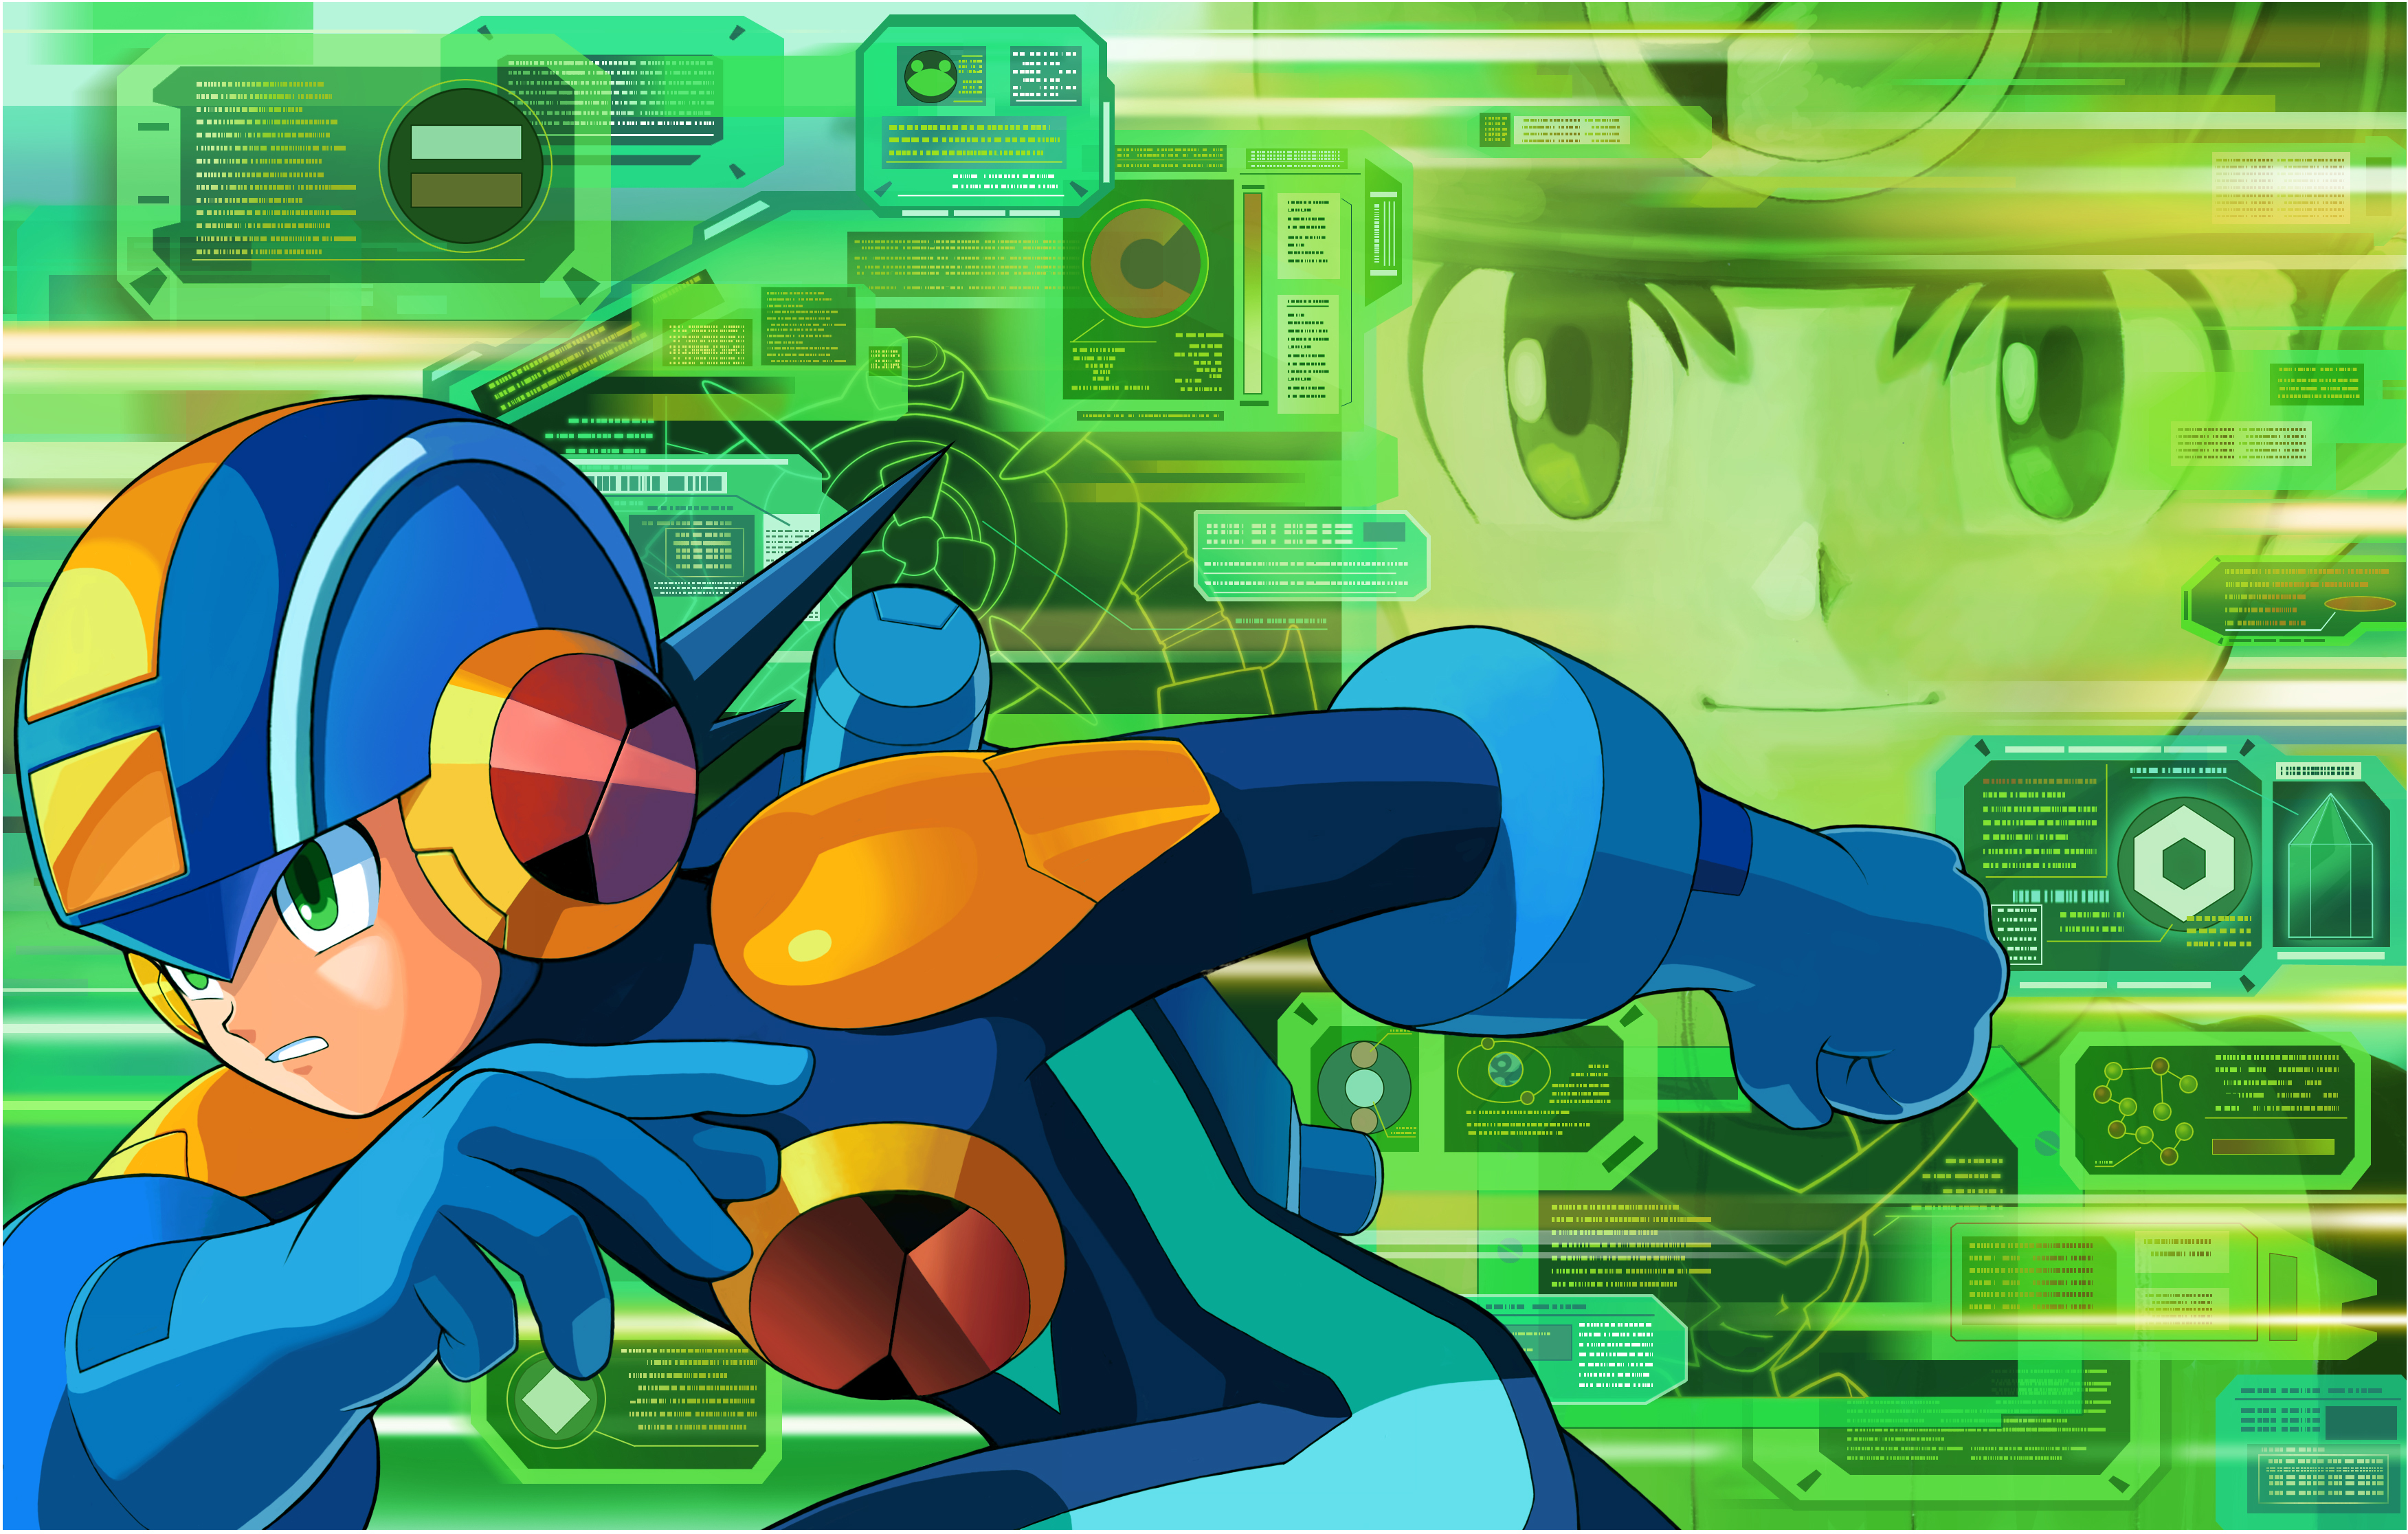 http://images3.wikia.nocookie.net/__cb20100626143940/megaman/images/1/13/Normal_bn2_promo.jpg